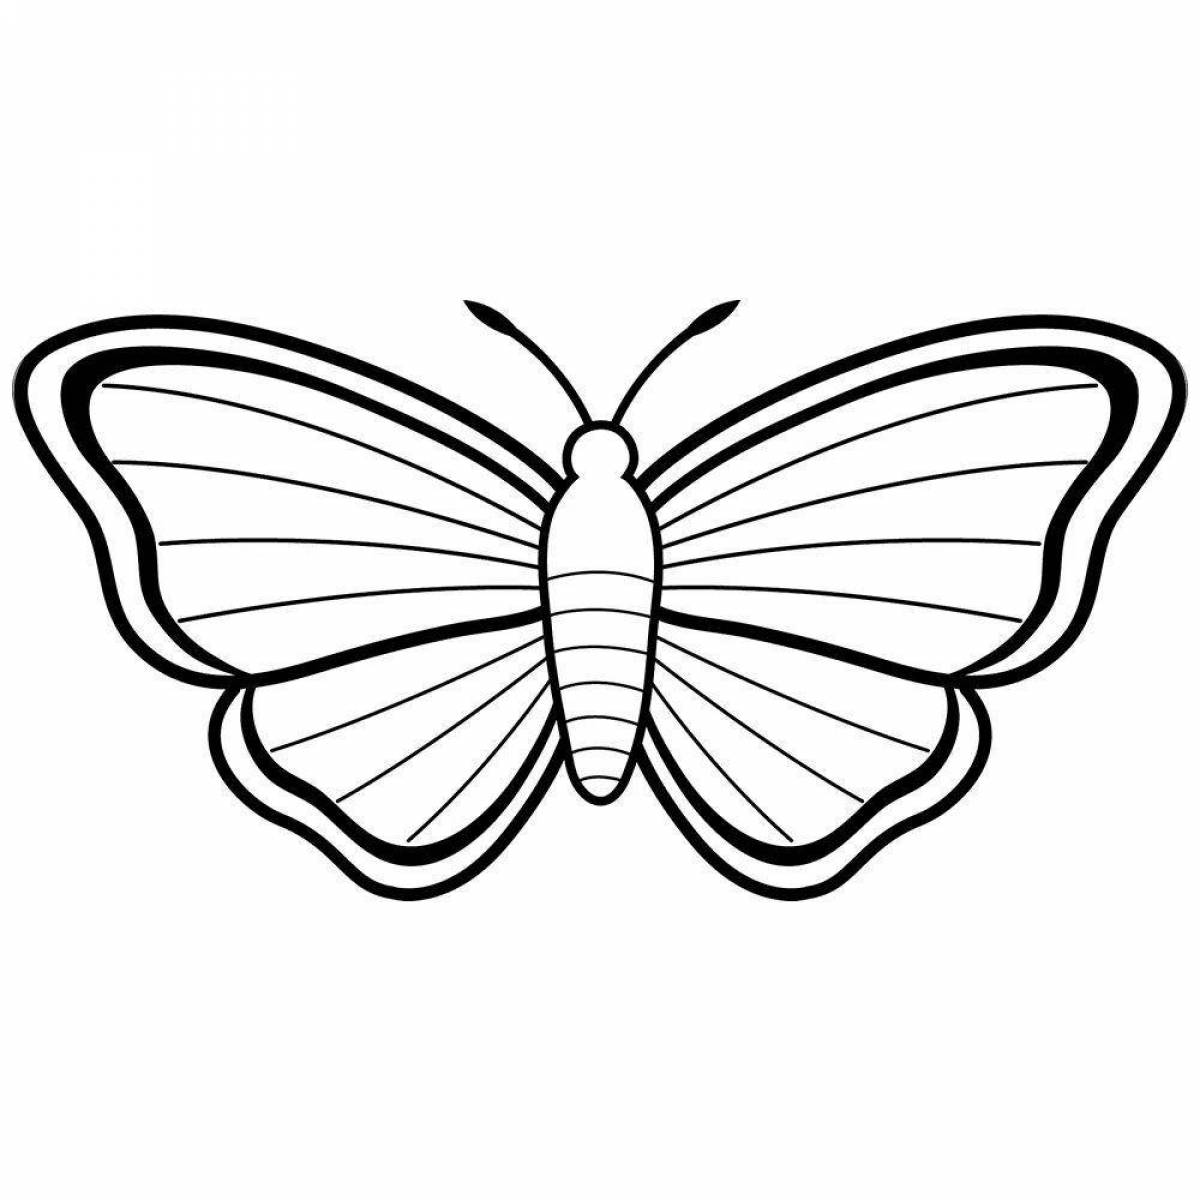 Butterfly wings coloring page